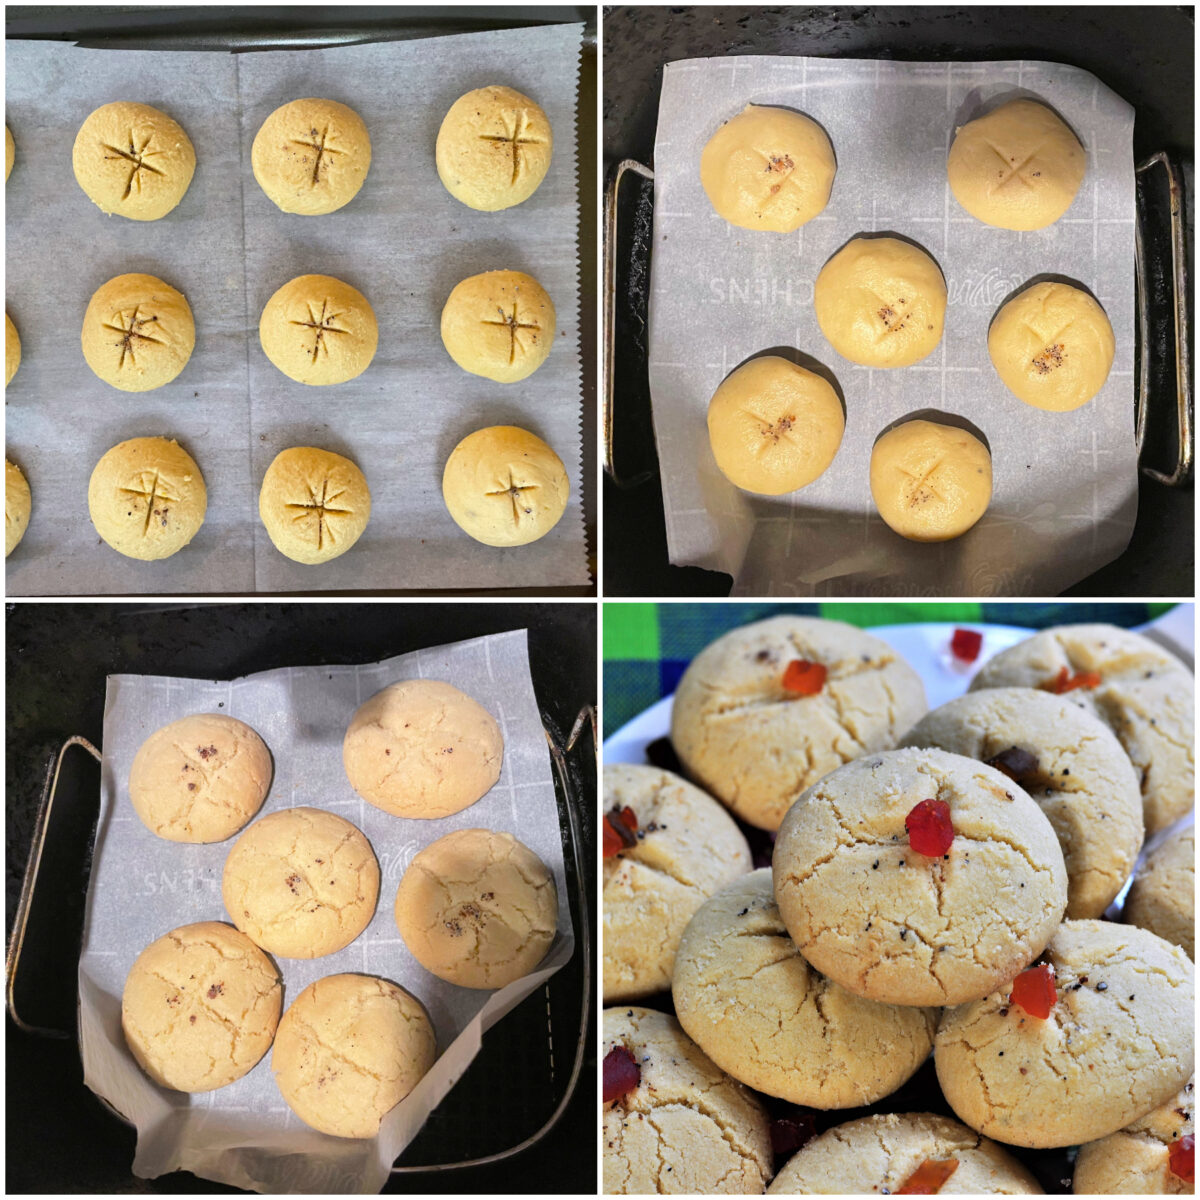 baking nankhatai in air fryer and oven.